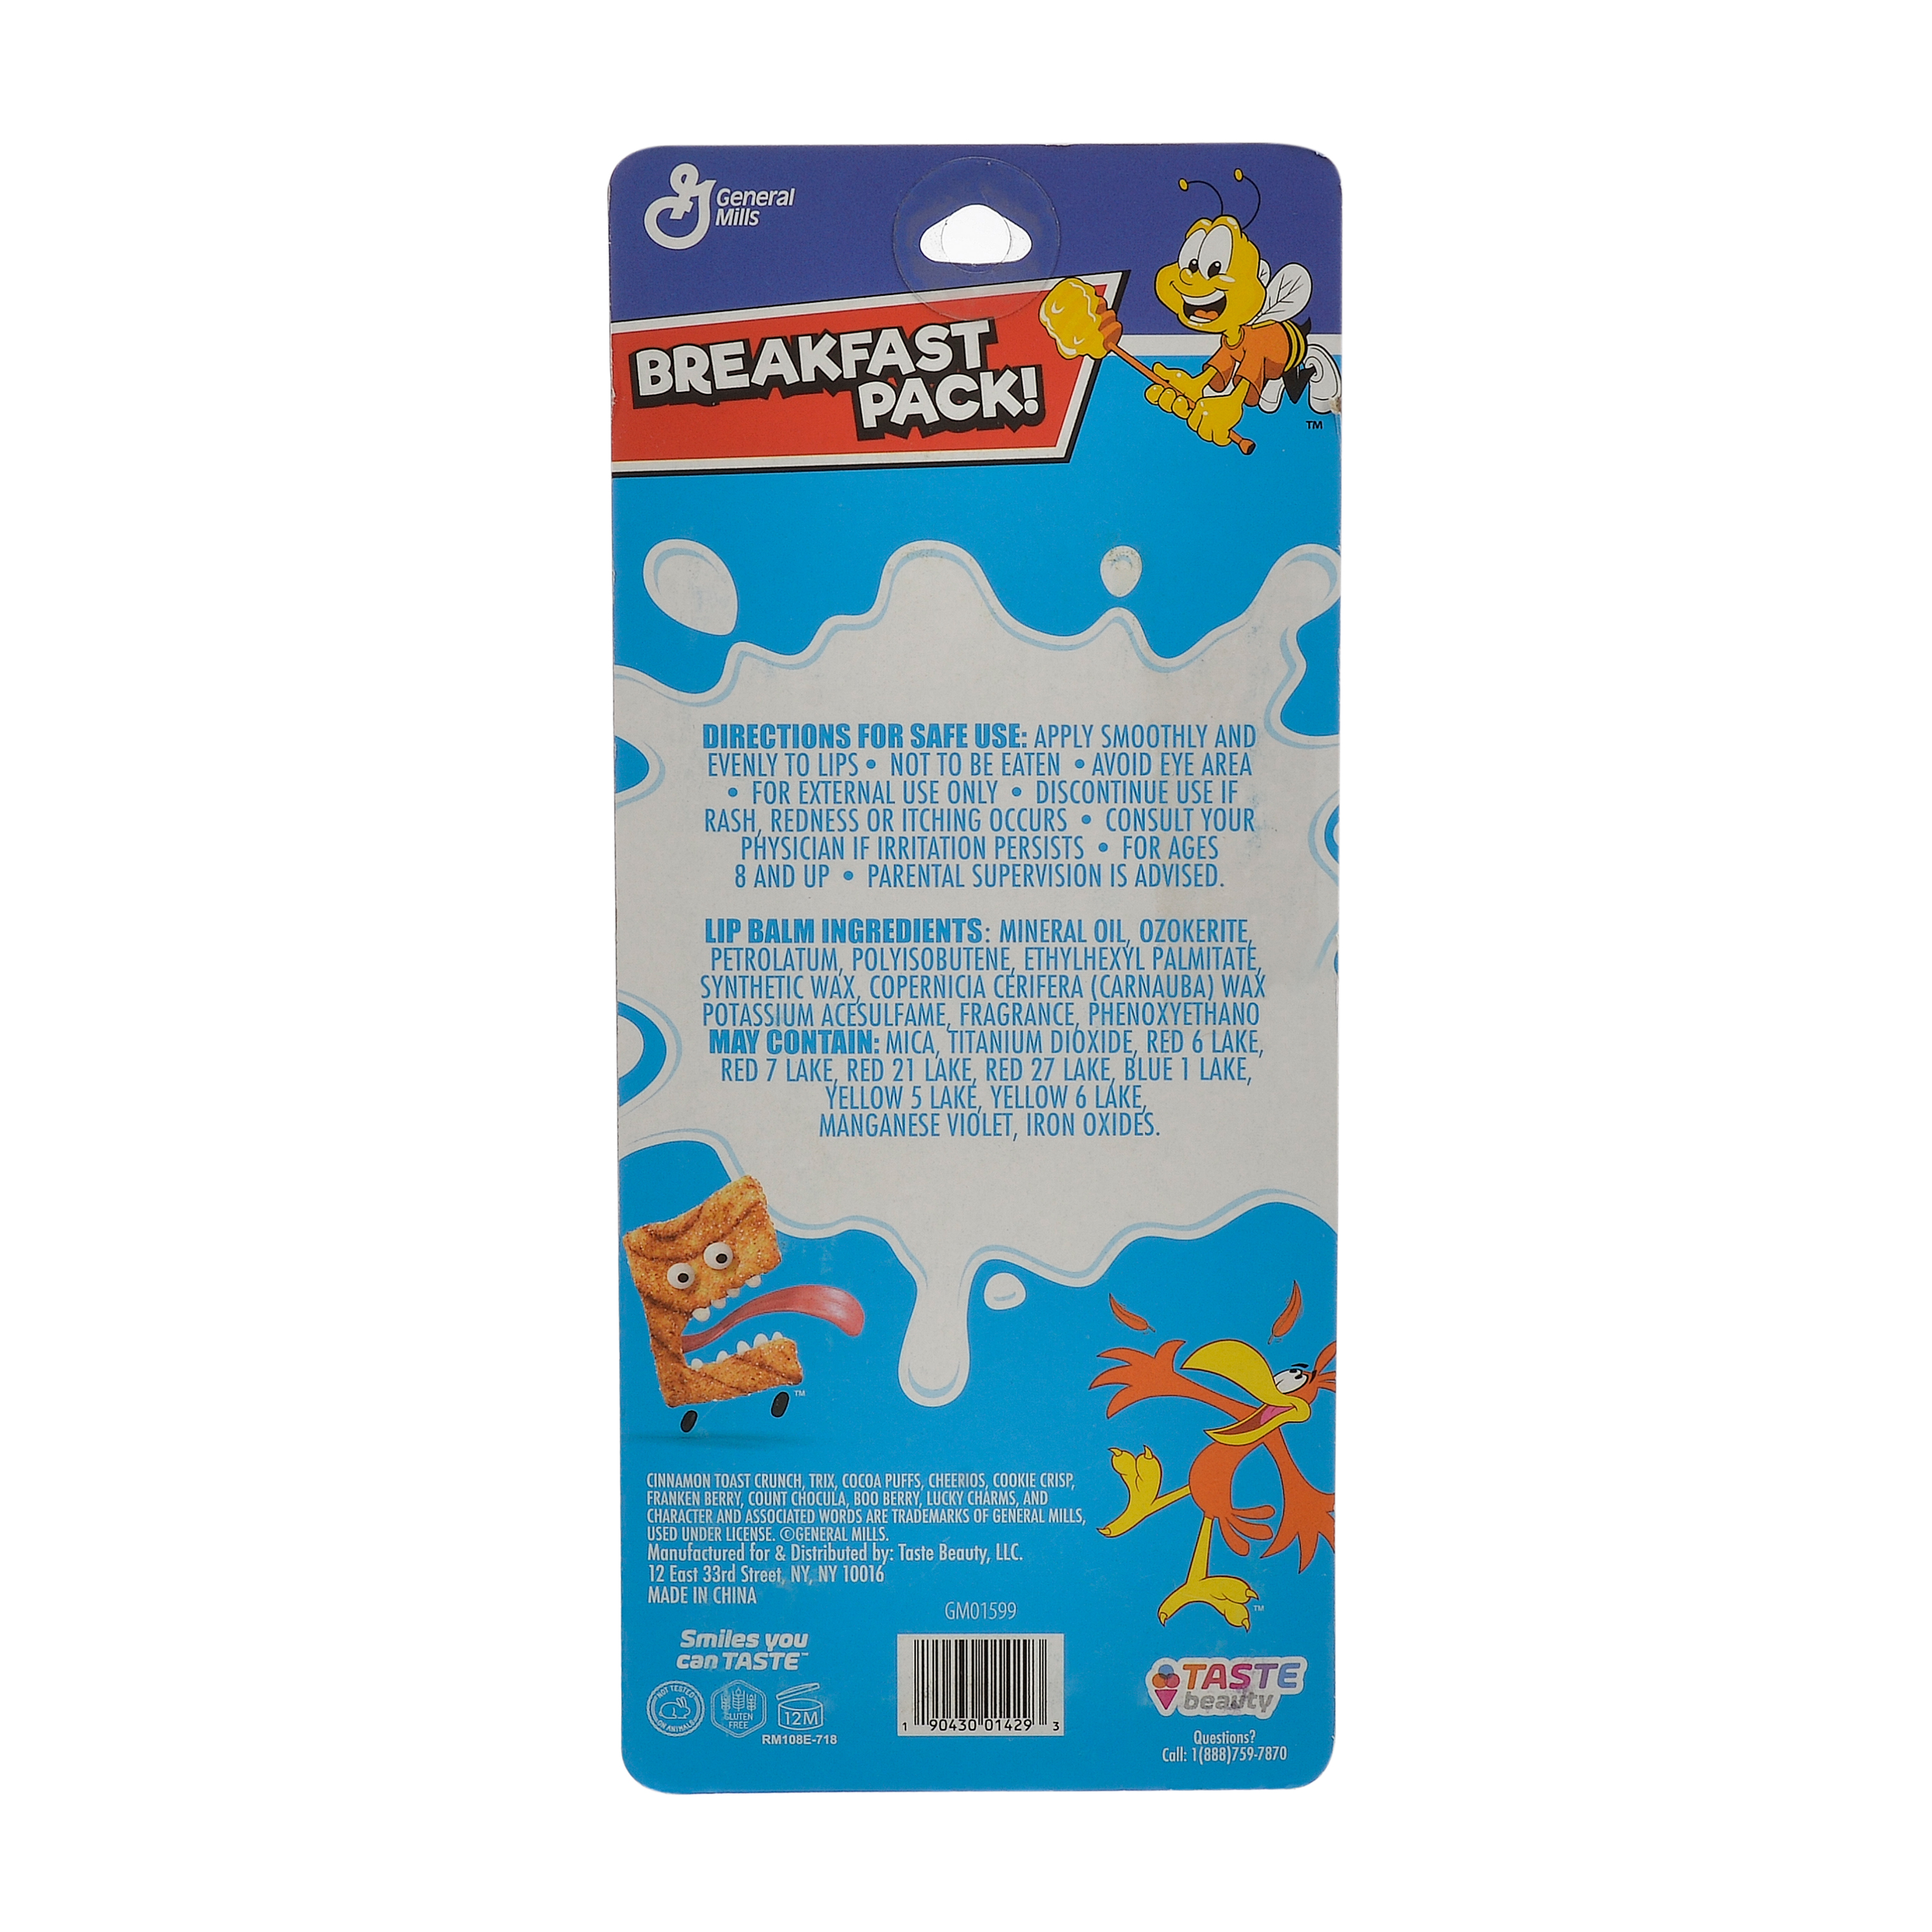 General Mills Breakfast Pack Cereal Flavored Lip Balm, 10 Pieces ($9.99 Value) - image 2 of 4